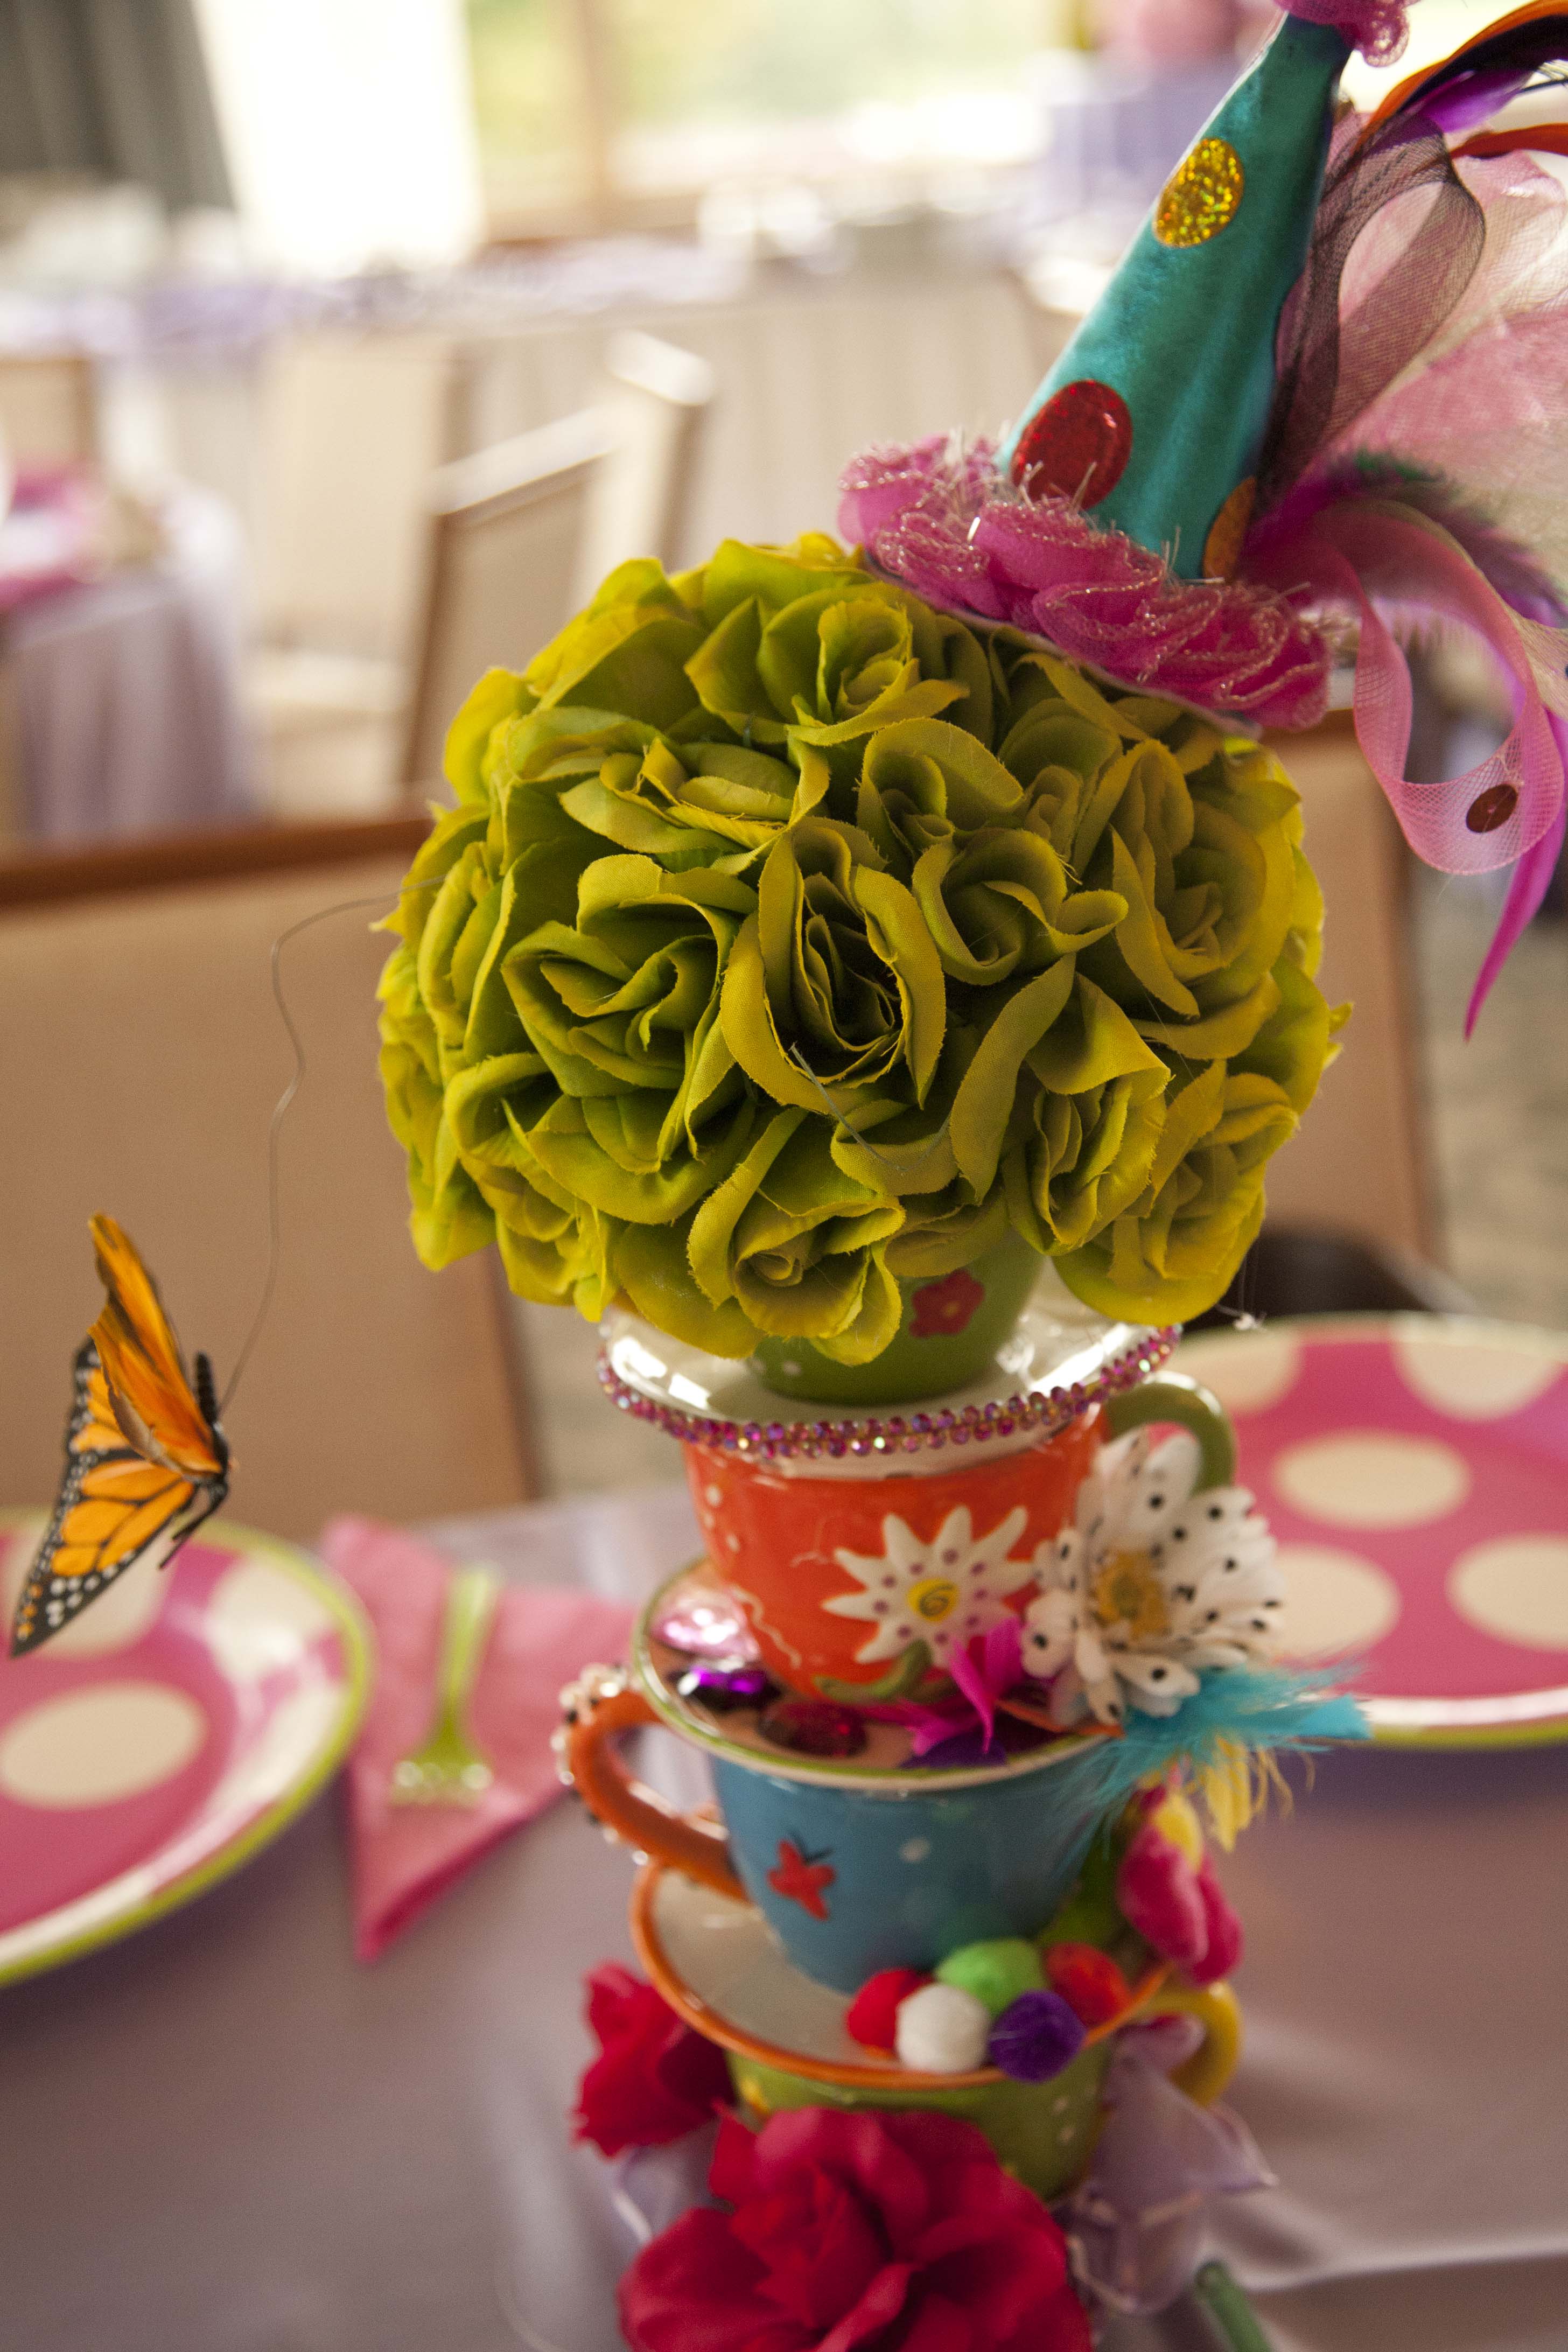 It's A Mad, Mad Hatter Party! - Project Nursery